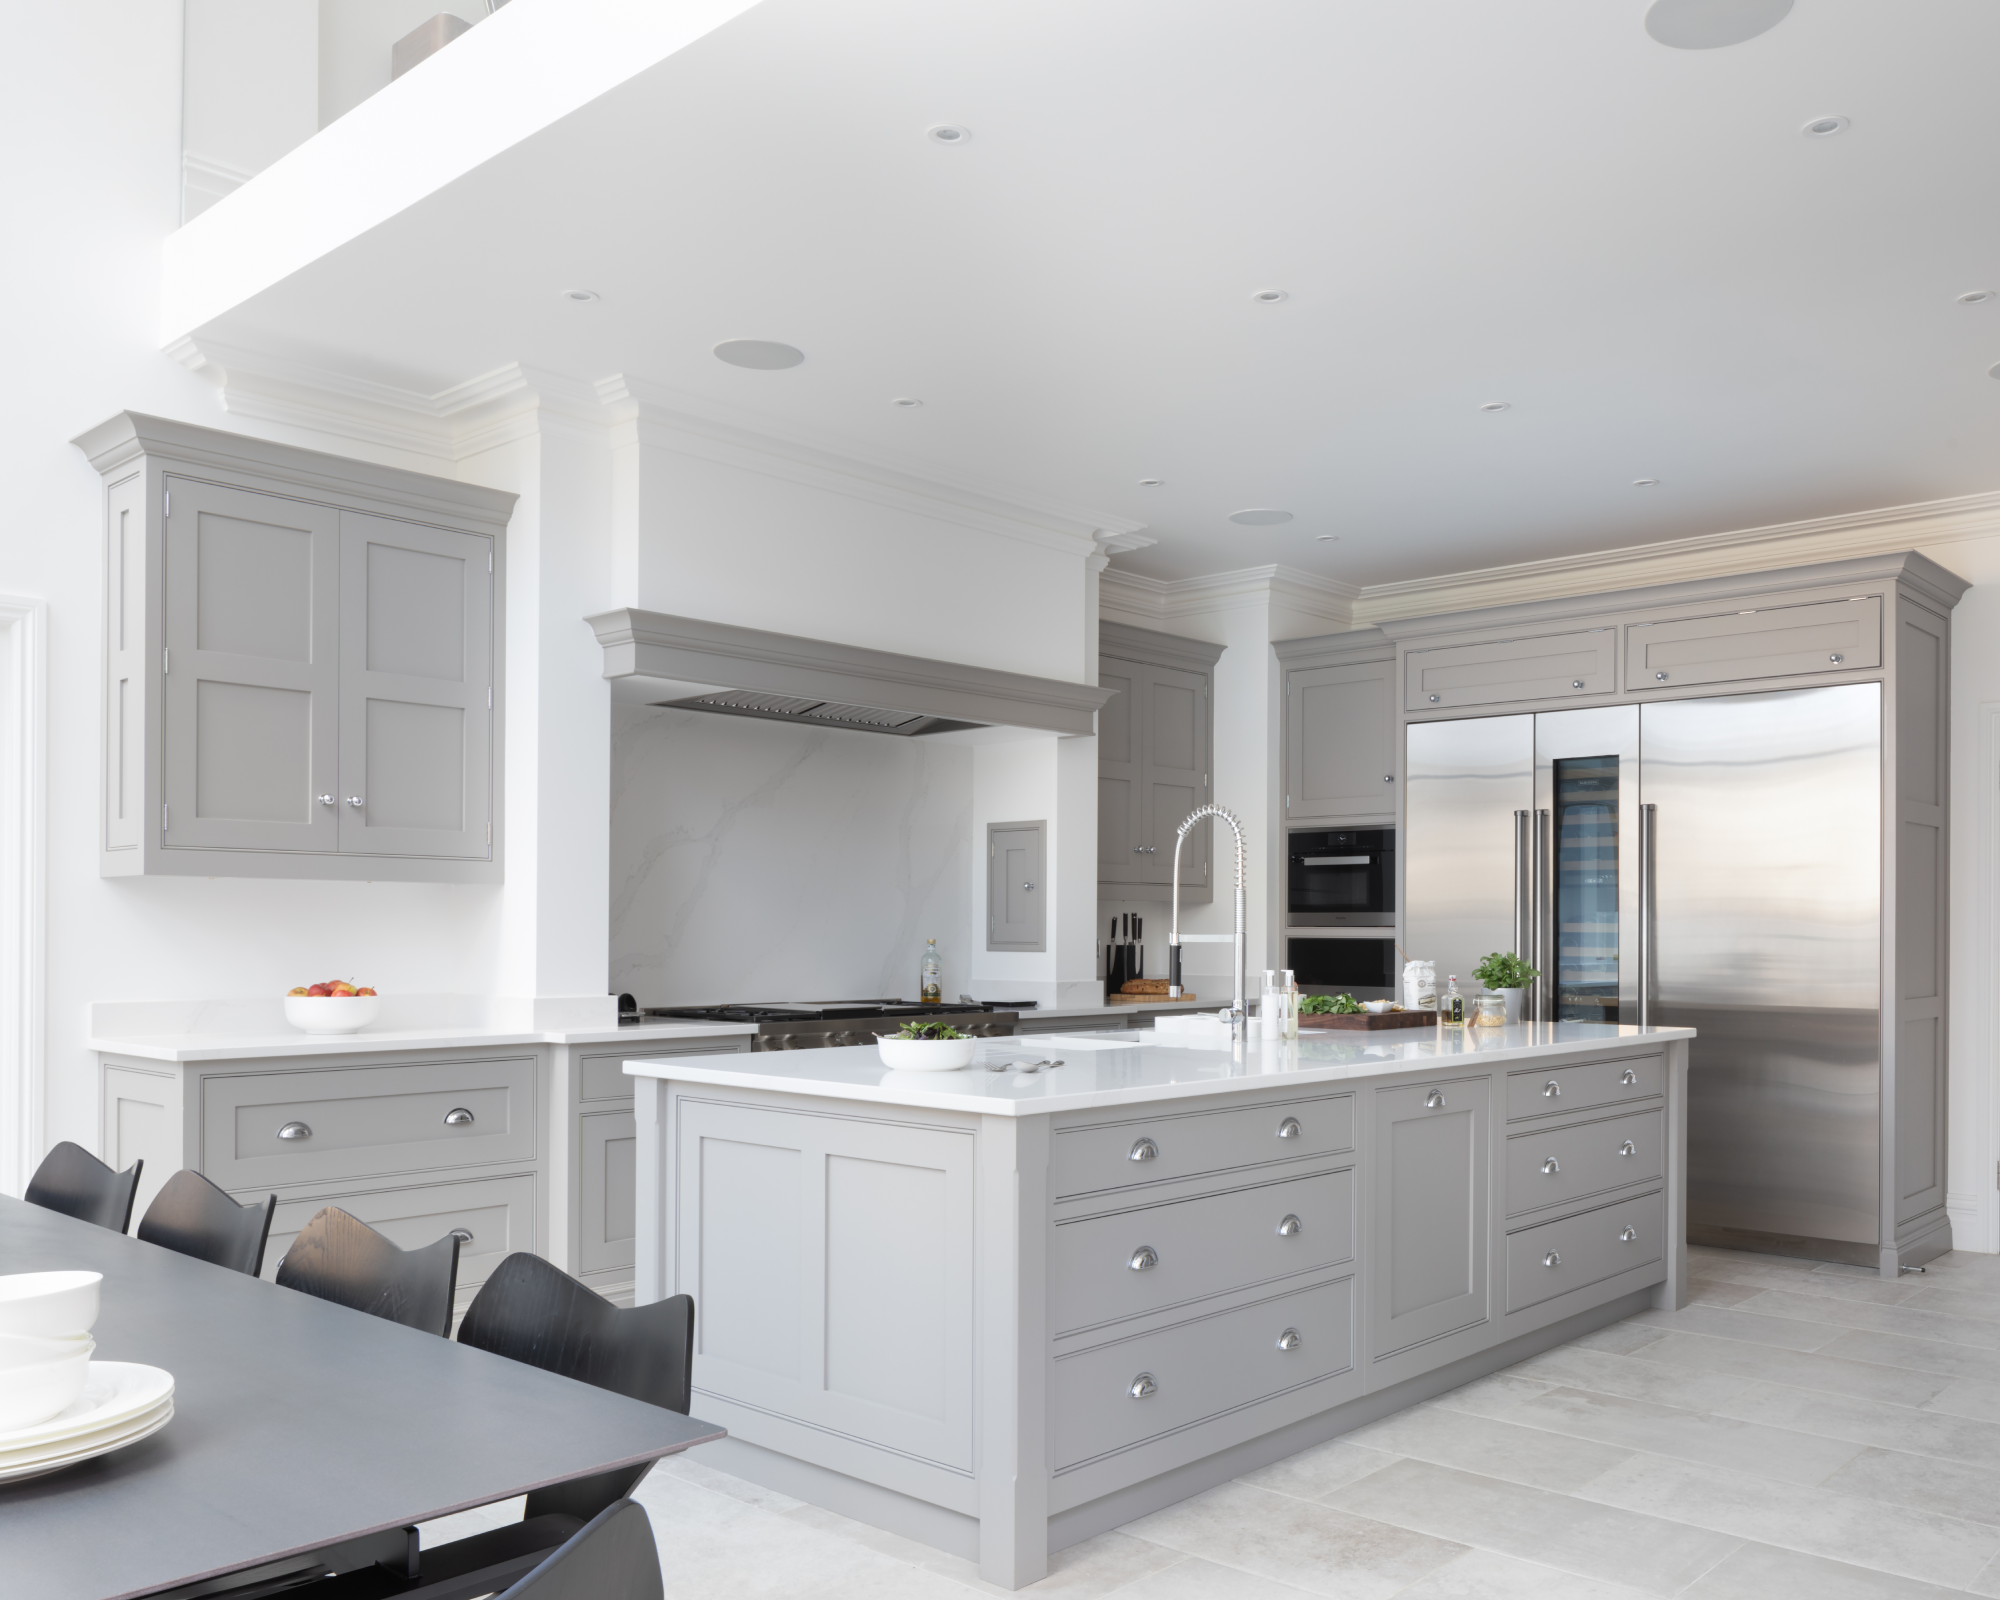 A white and gray open plan kitchen idea with double height ceiling.